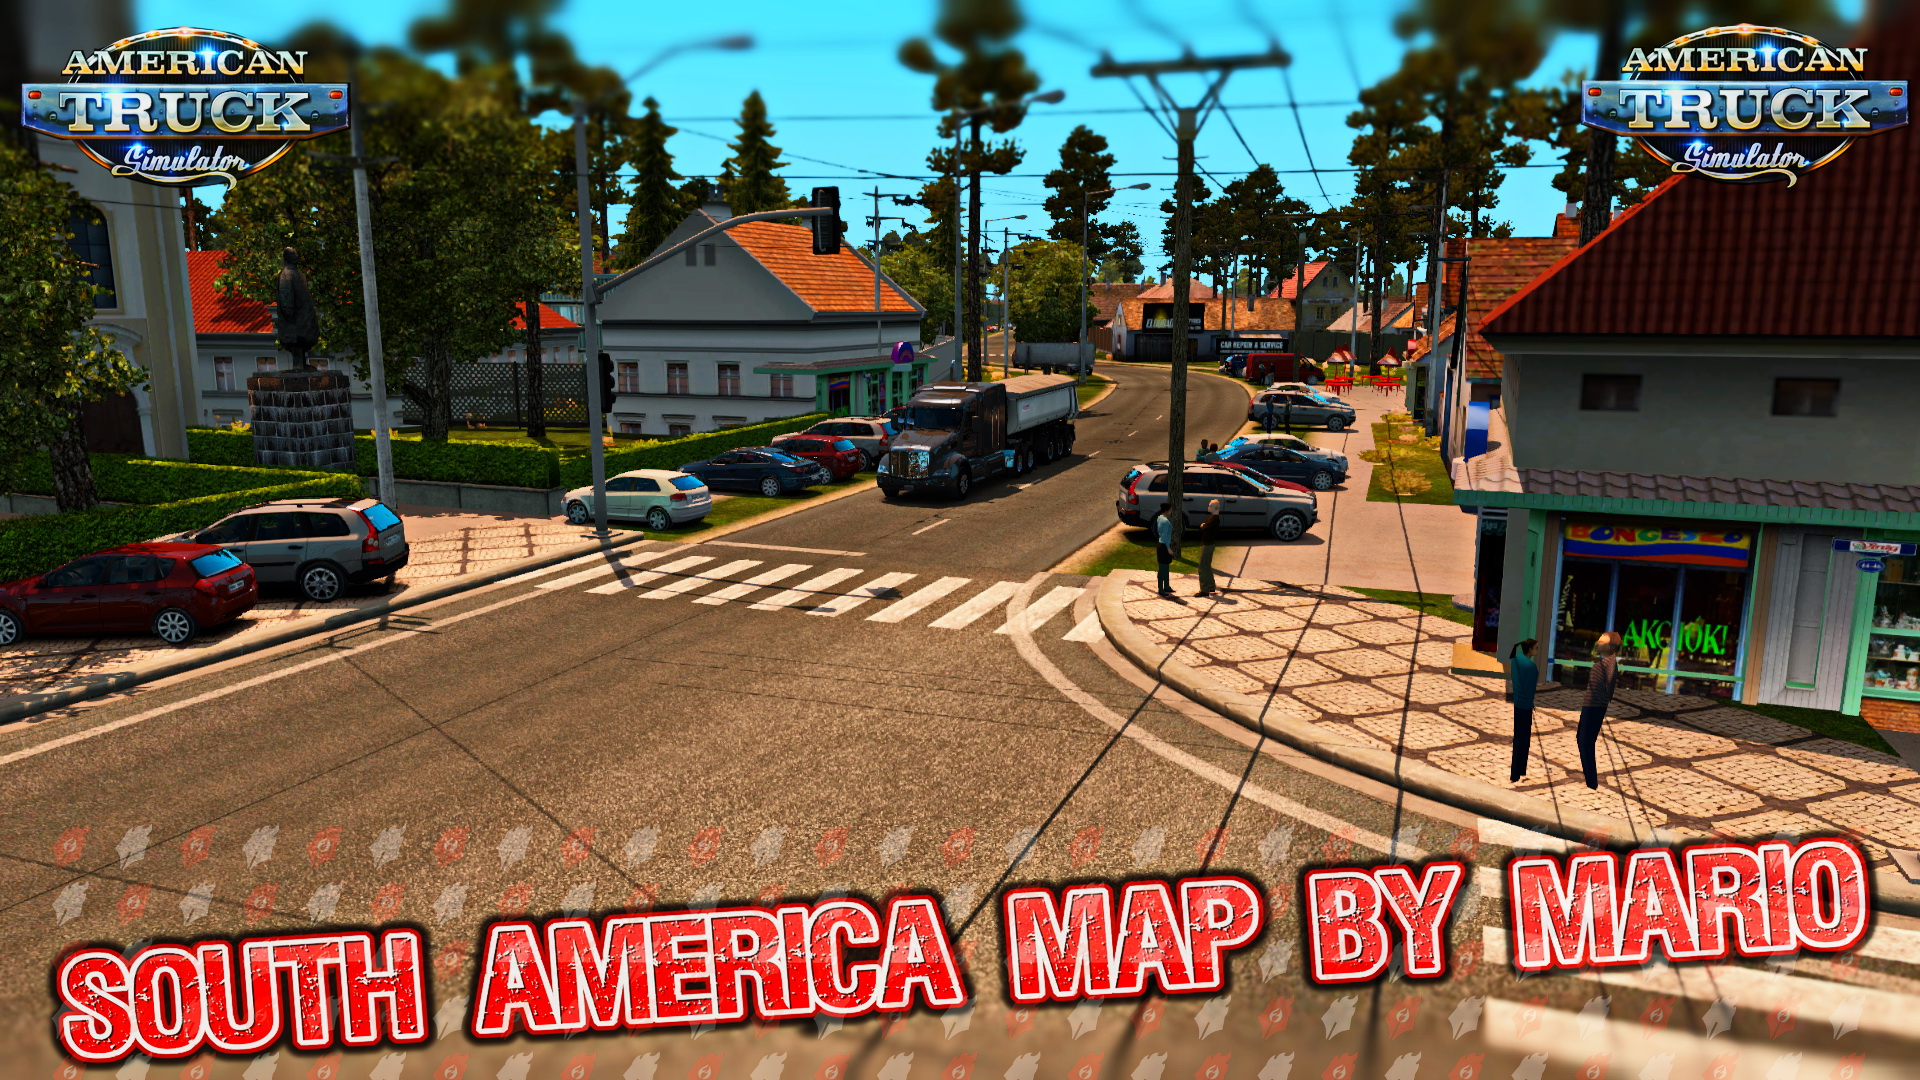 South America Map by Mario for ATS (American Truck Simulator)